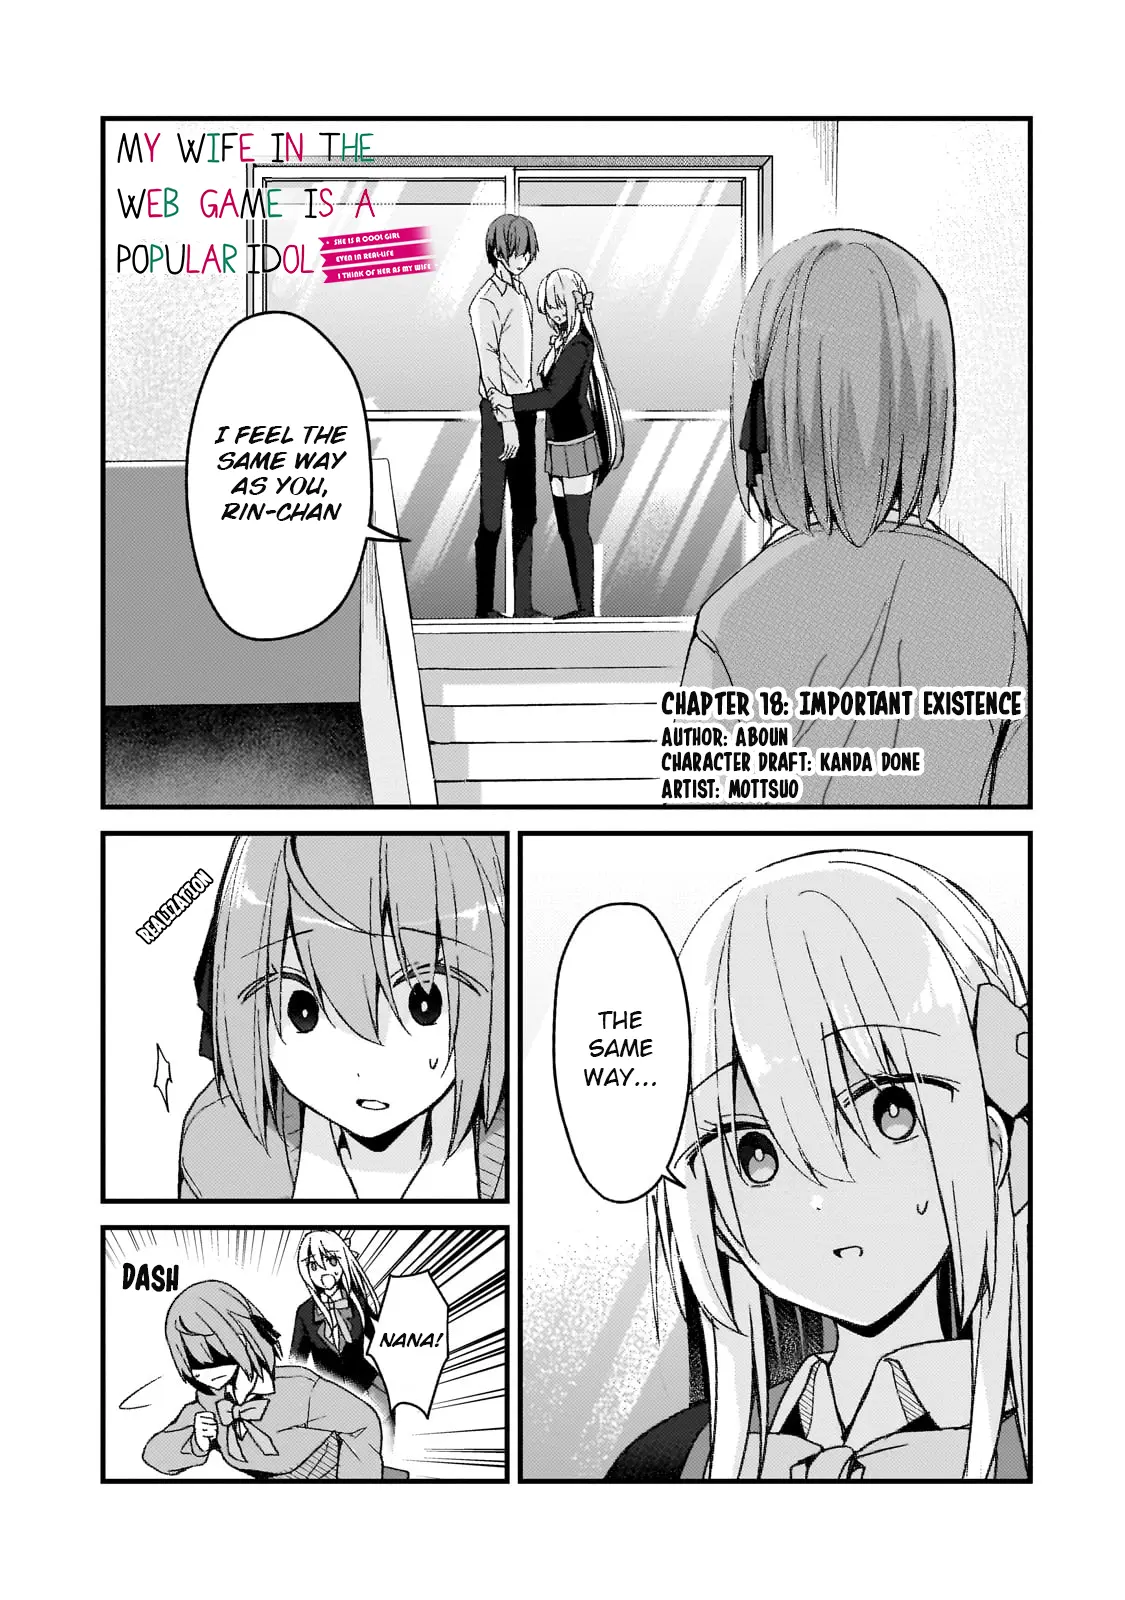 My Web Game Wife Is A Popular Idol Irl - 18 page 1-147589e6